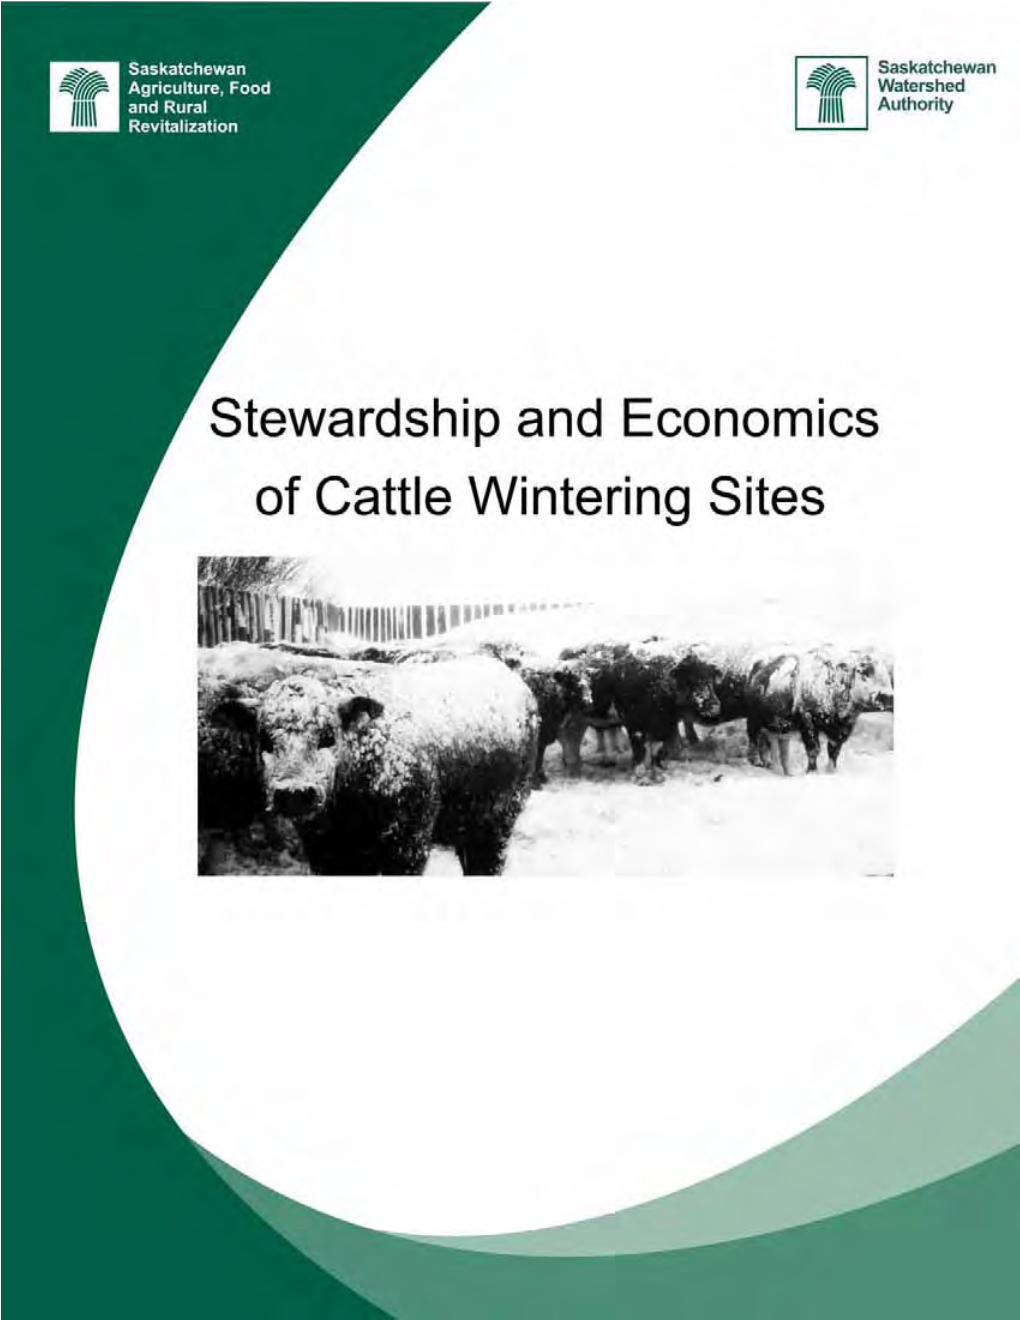 Stewardship and Economics of Cattle Wintering Sites